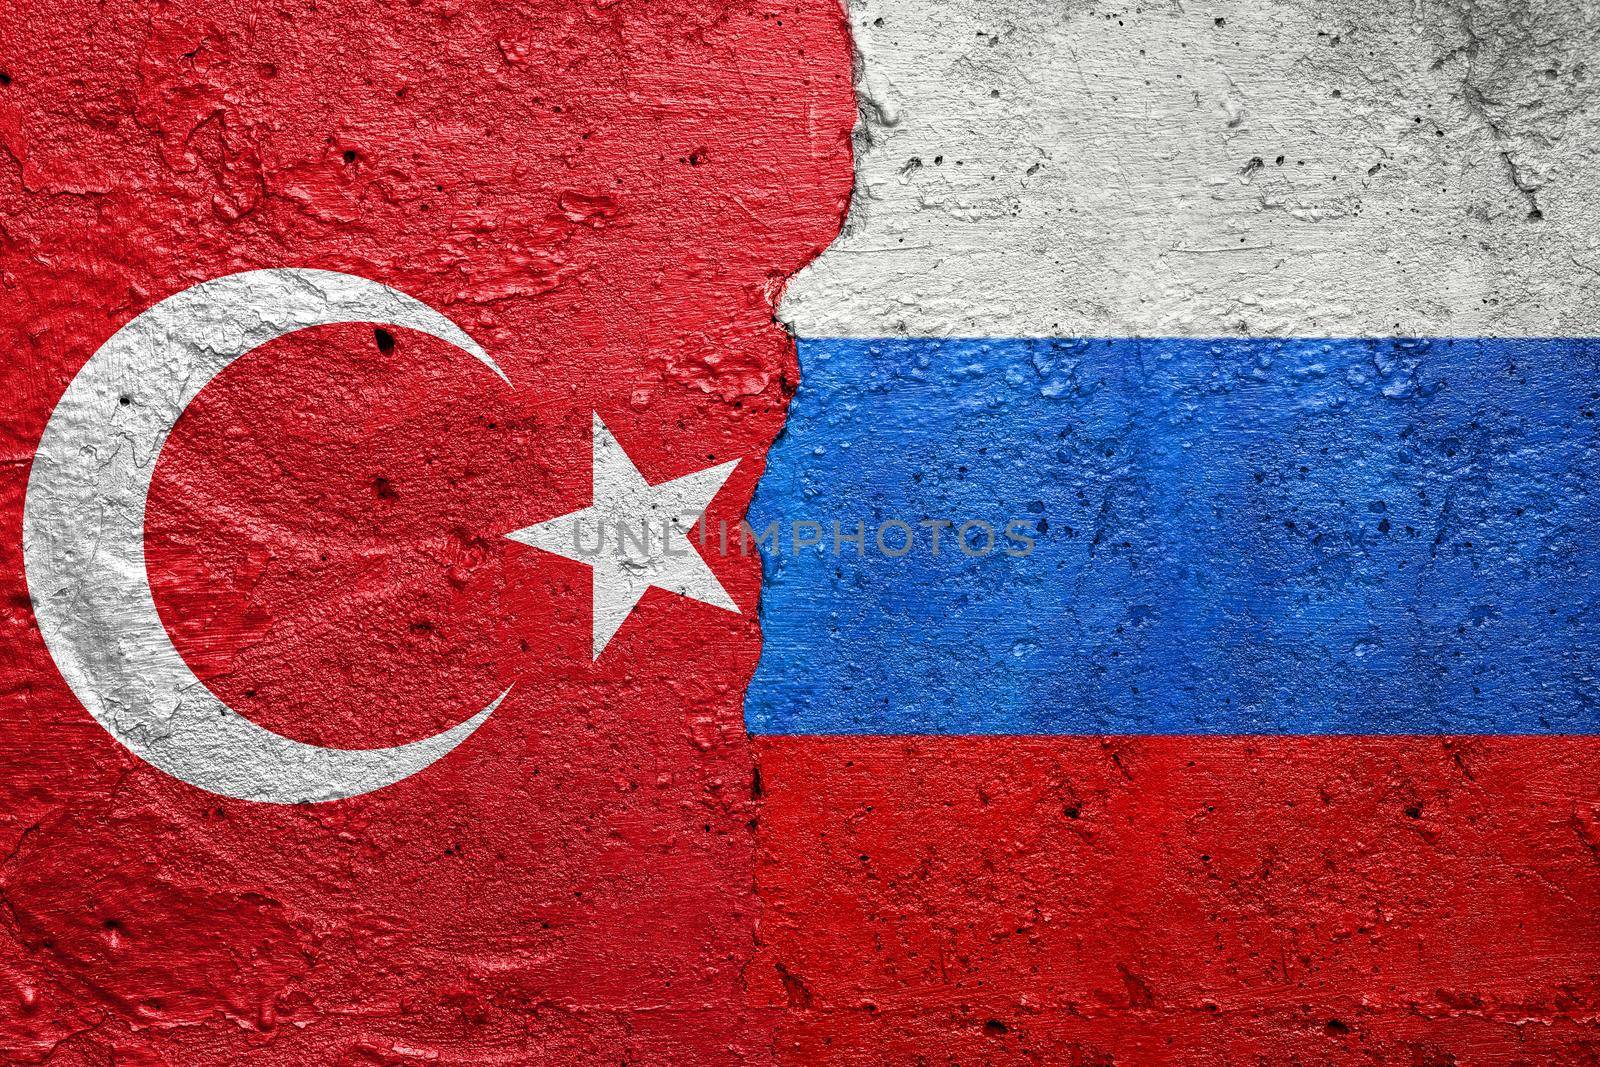 Turkey and Russia - Cracked concrete wall painted with a Turkish flag on the left and a Russian Federation flag on the right stock photo by adamr